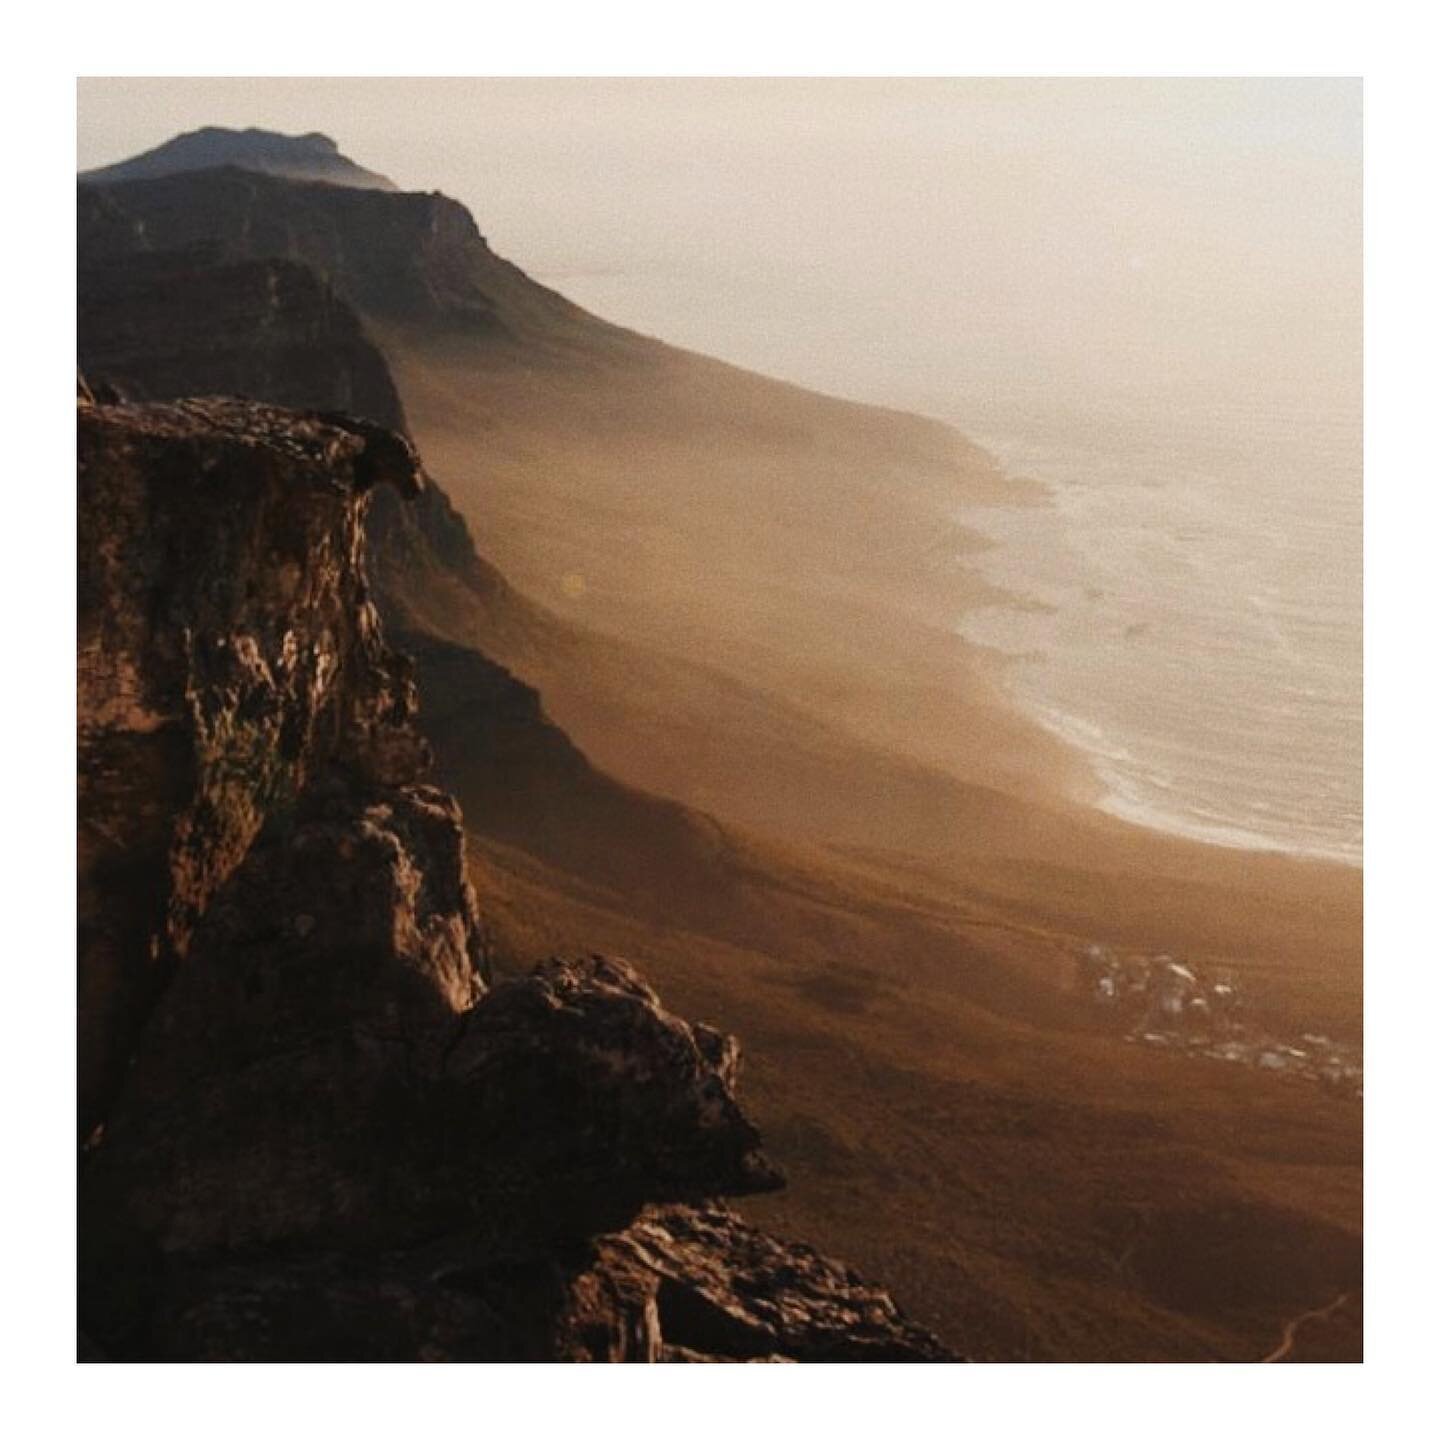 Bless the rains down in Africa... &amp; the golden hour on these mountains 😍
:
#capetown #southafrica #southafricatravel #goldenhour #mountains #twelveapostles #viewsfromabove #tablemountain #lionshead #hiking #southafricaza #capetownliving #wonderl